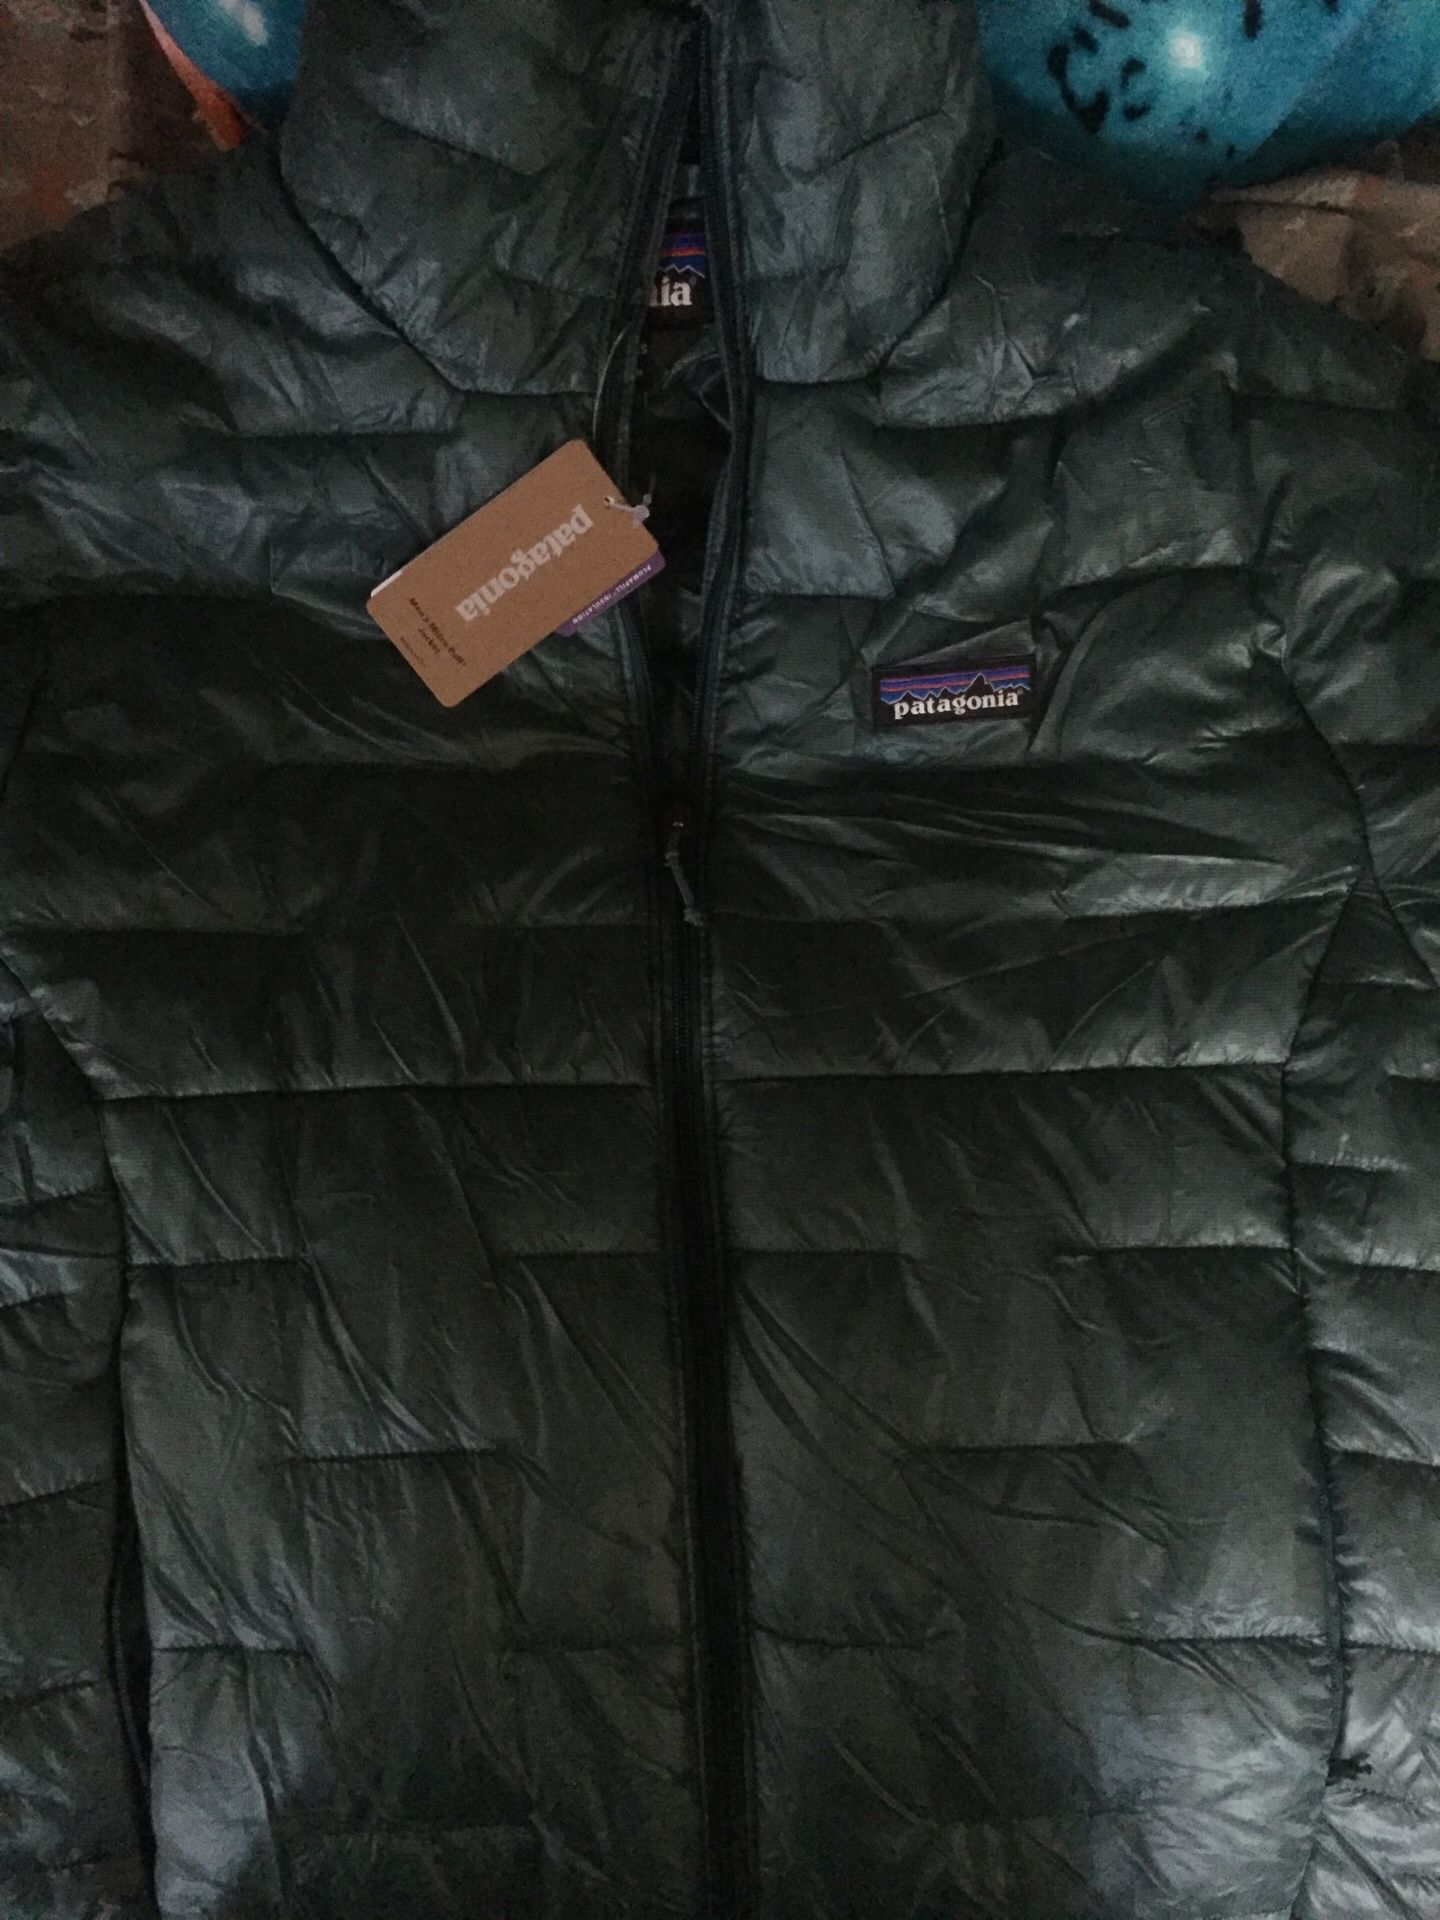 Patagonia puff jacket men’s small size